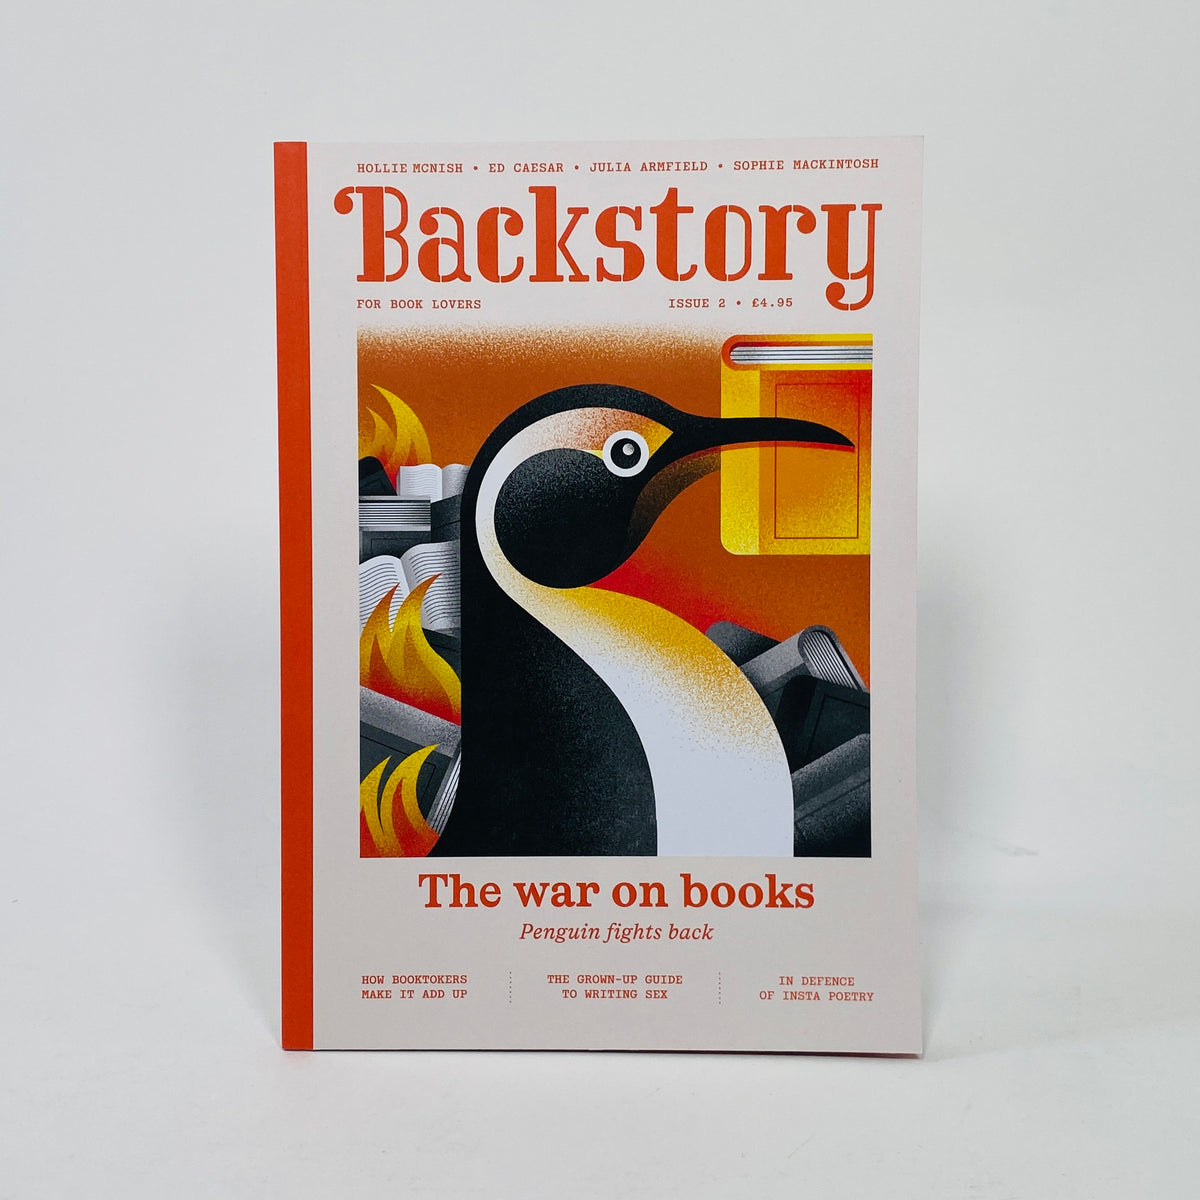 Backstory #2 - The War on Books